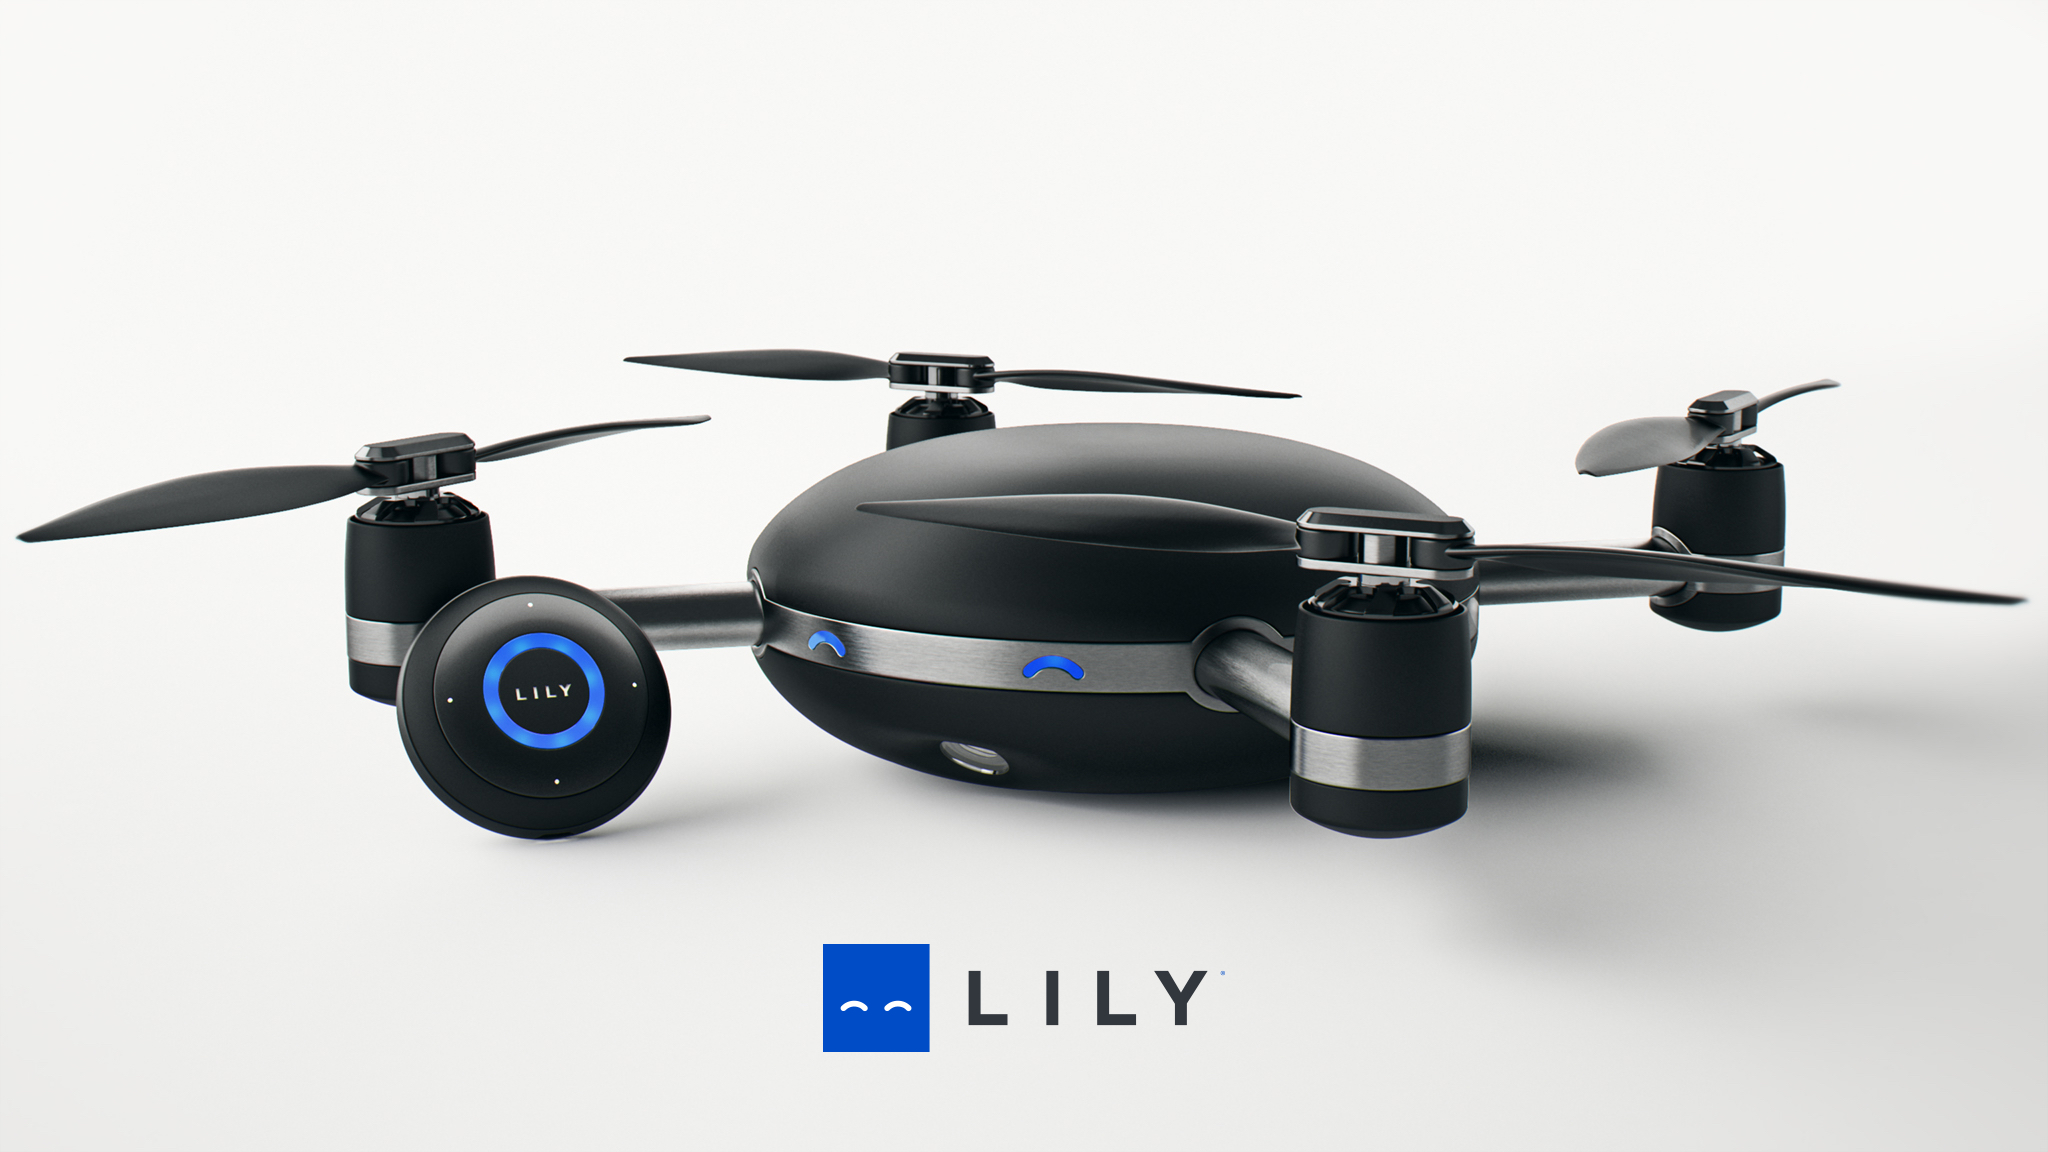 A Second Opinion on the Lily Drone